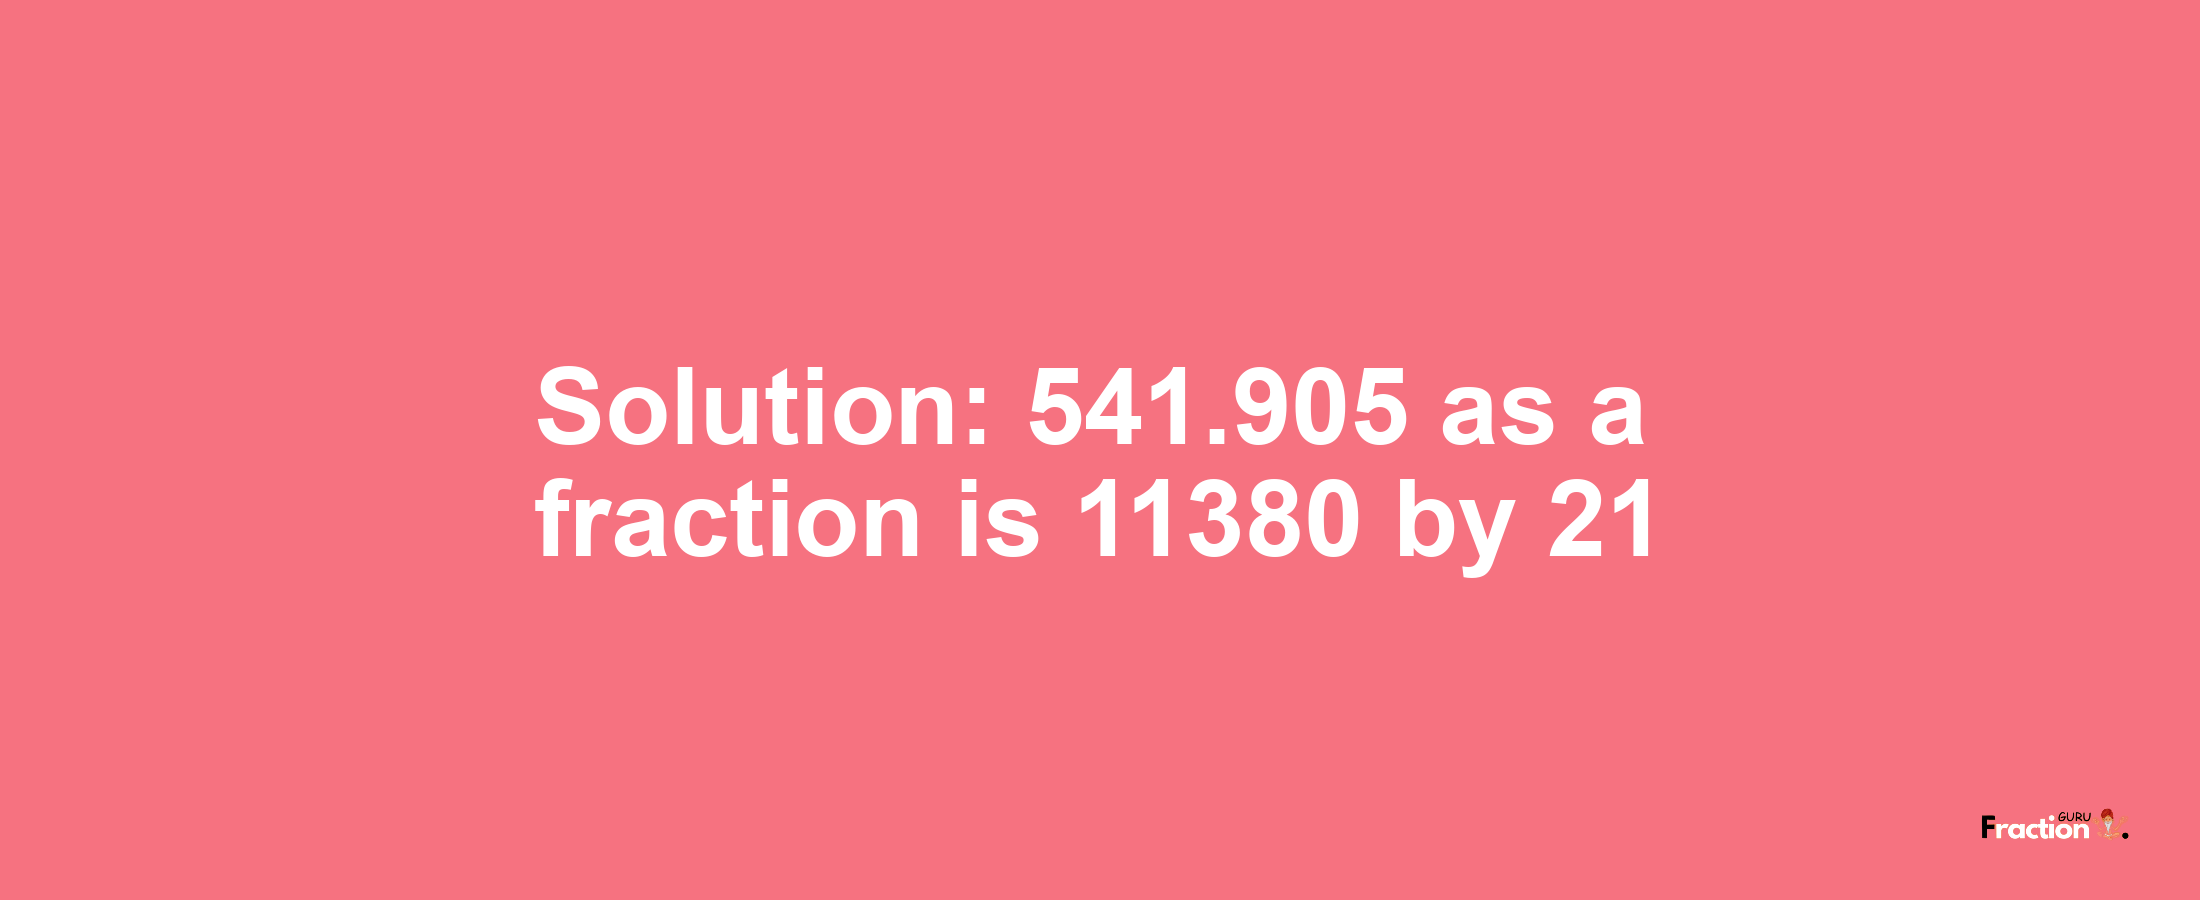 Solution:541.905 as a fraction is 11380/21